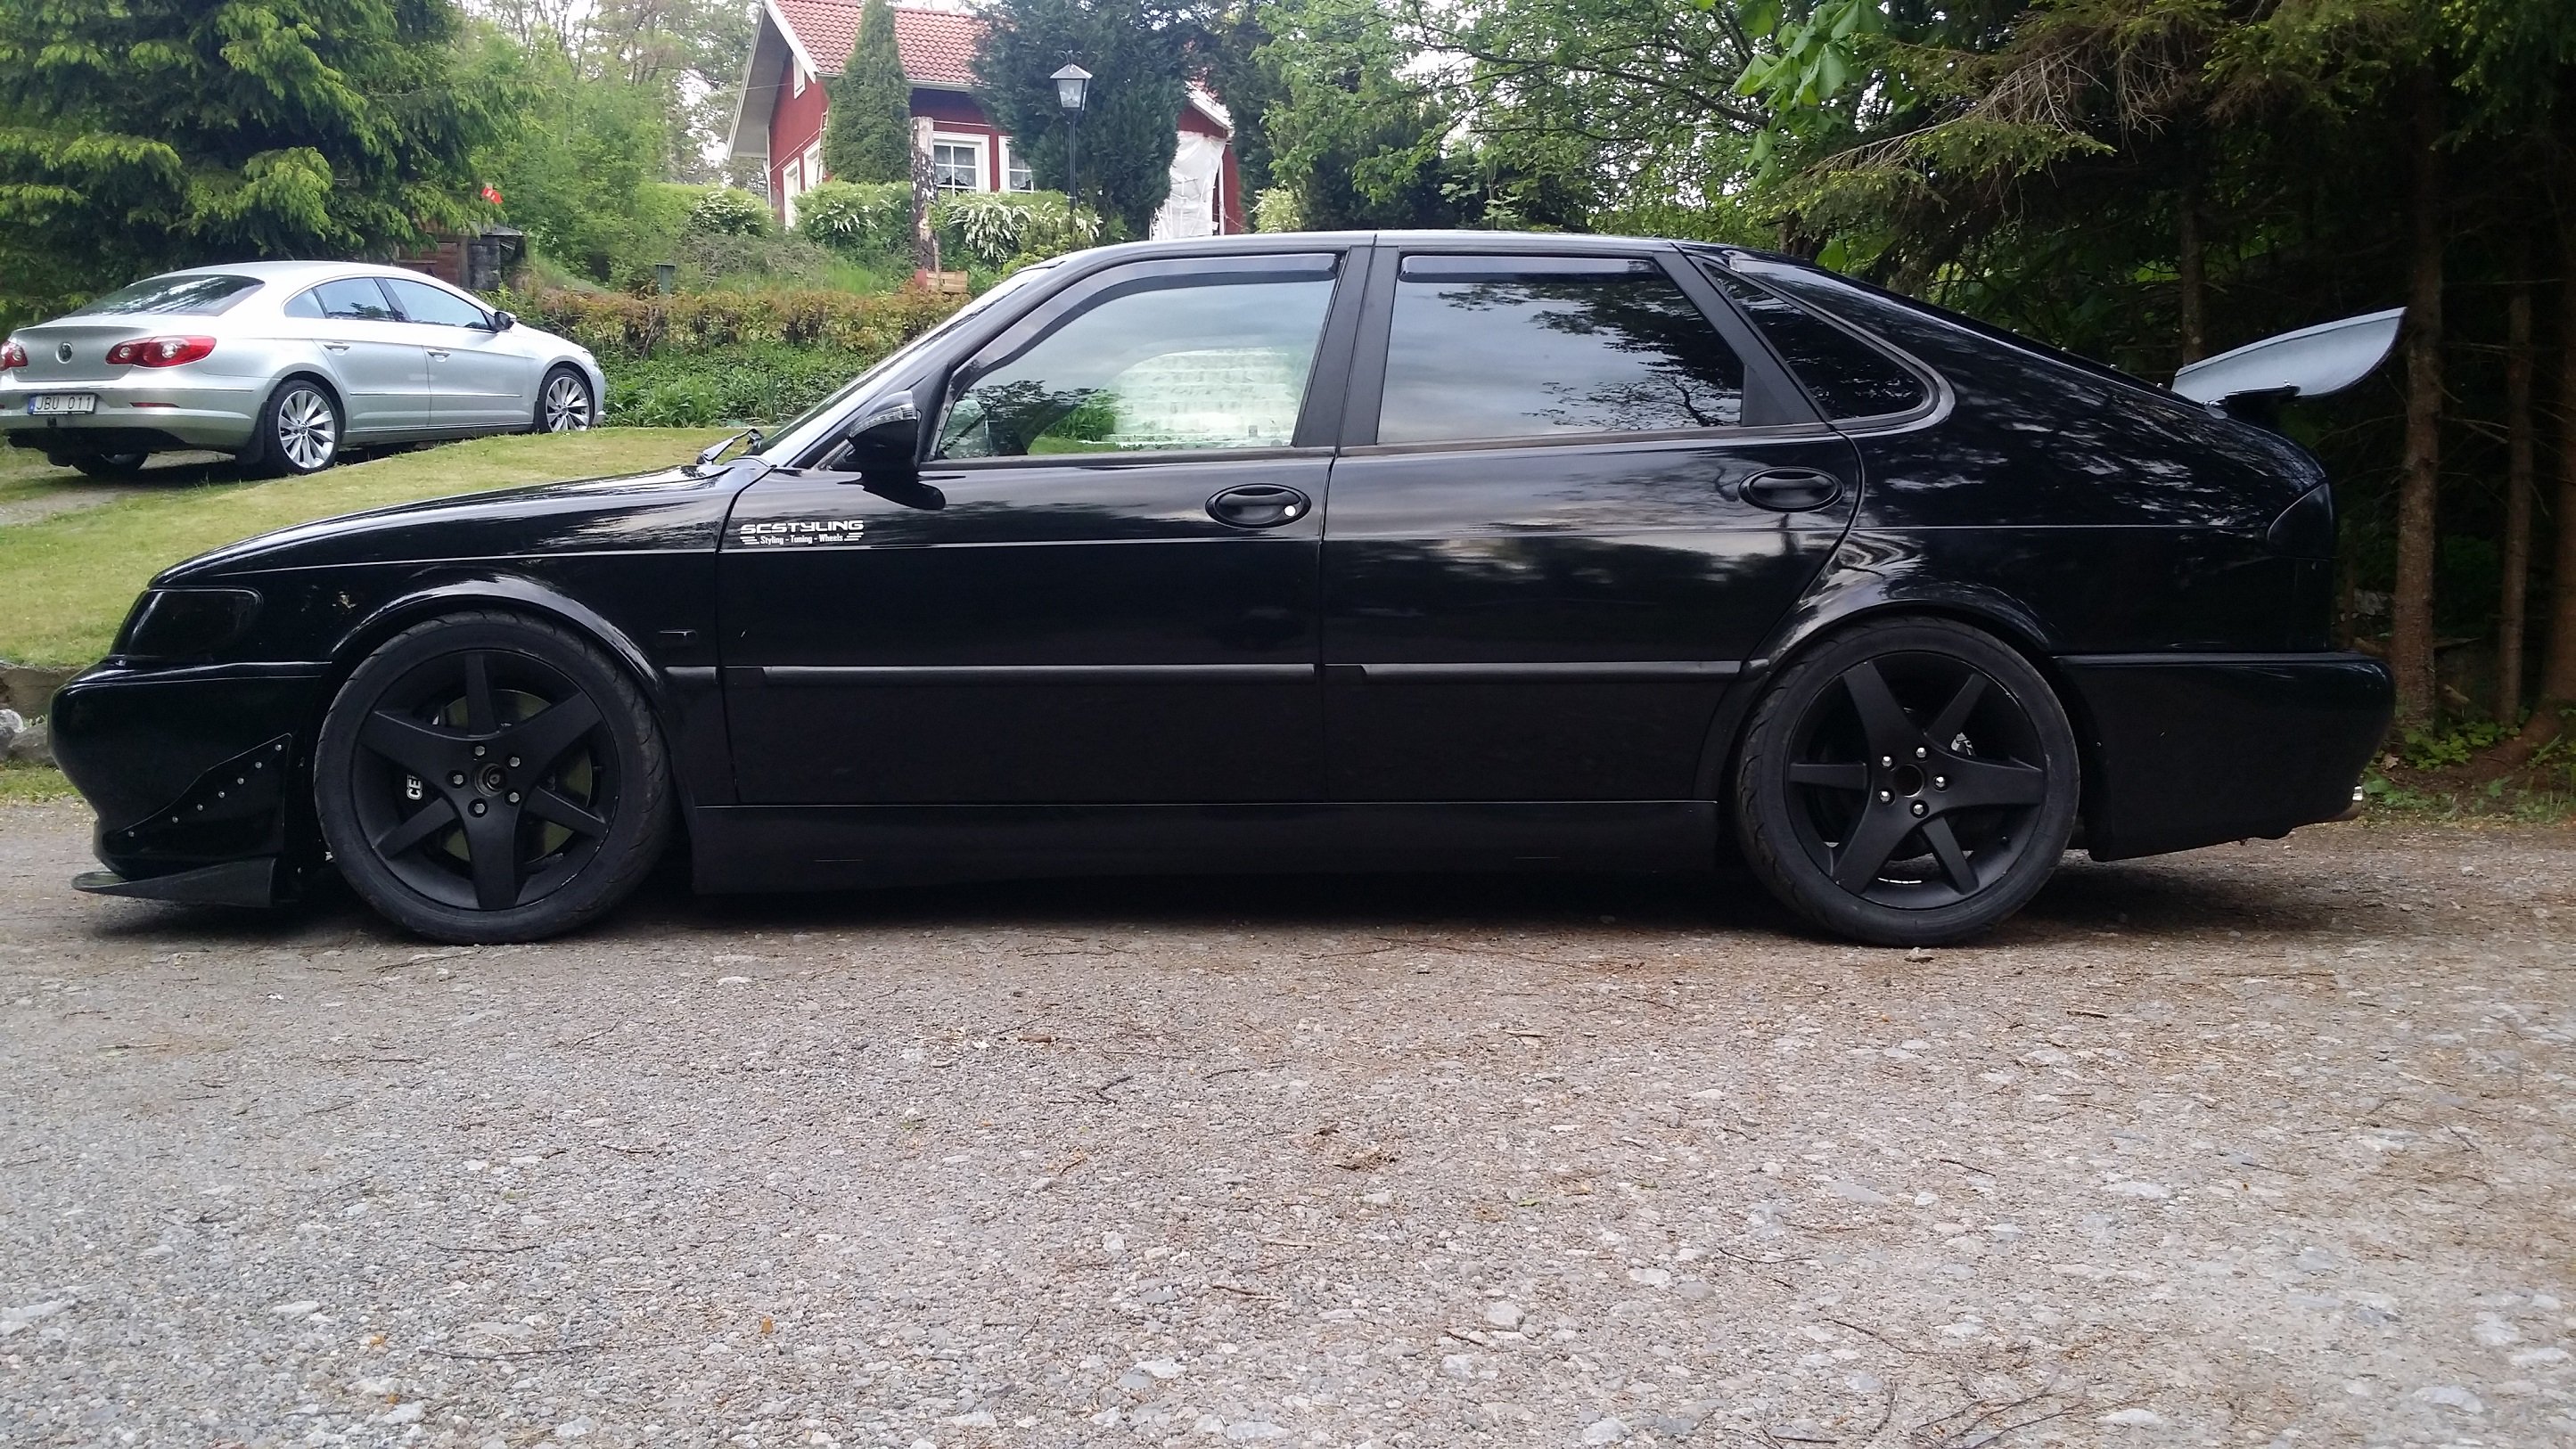 Twitter 上的 CEIKAperformance："SAAB 9-3 Aero, 2001 equipped with our front  bolt-on CEIKA BBK. Big brake kits with rear parking brake available for all  SAAB models. #CEIKA https://t.co/dlVZ7Rsd91" / Twitter